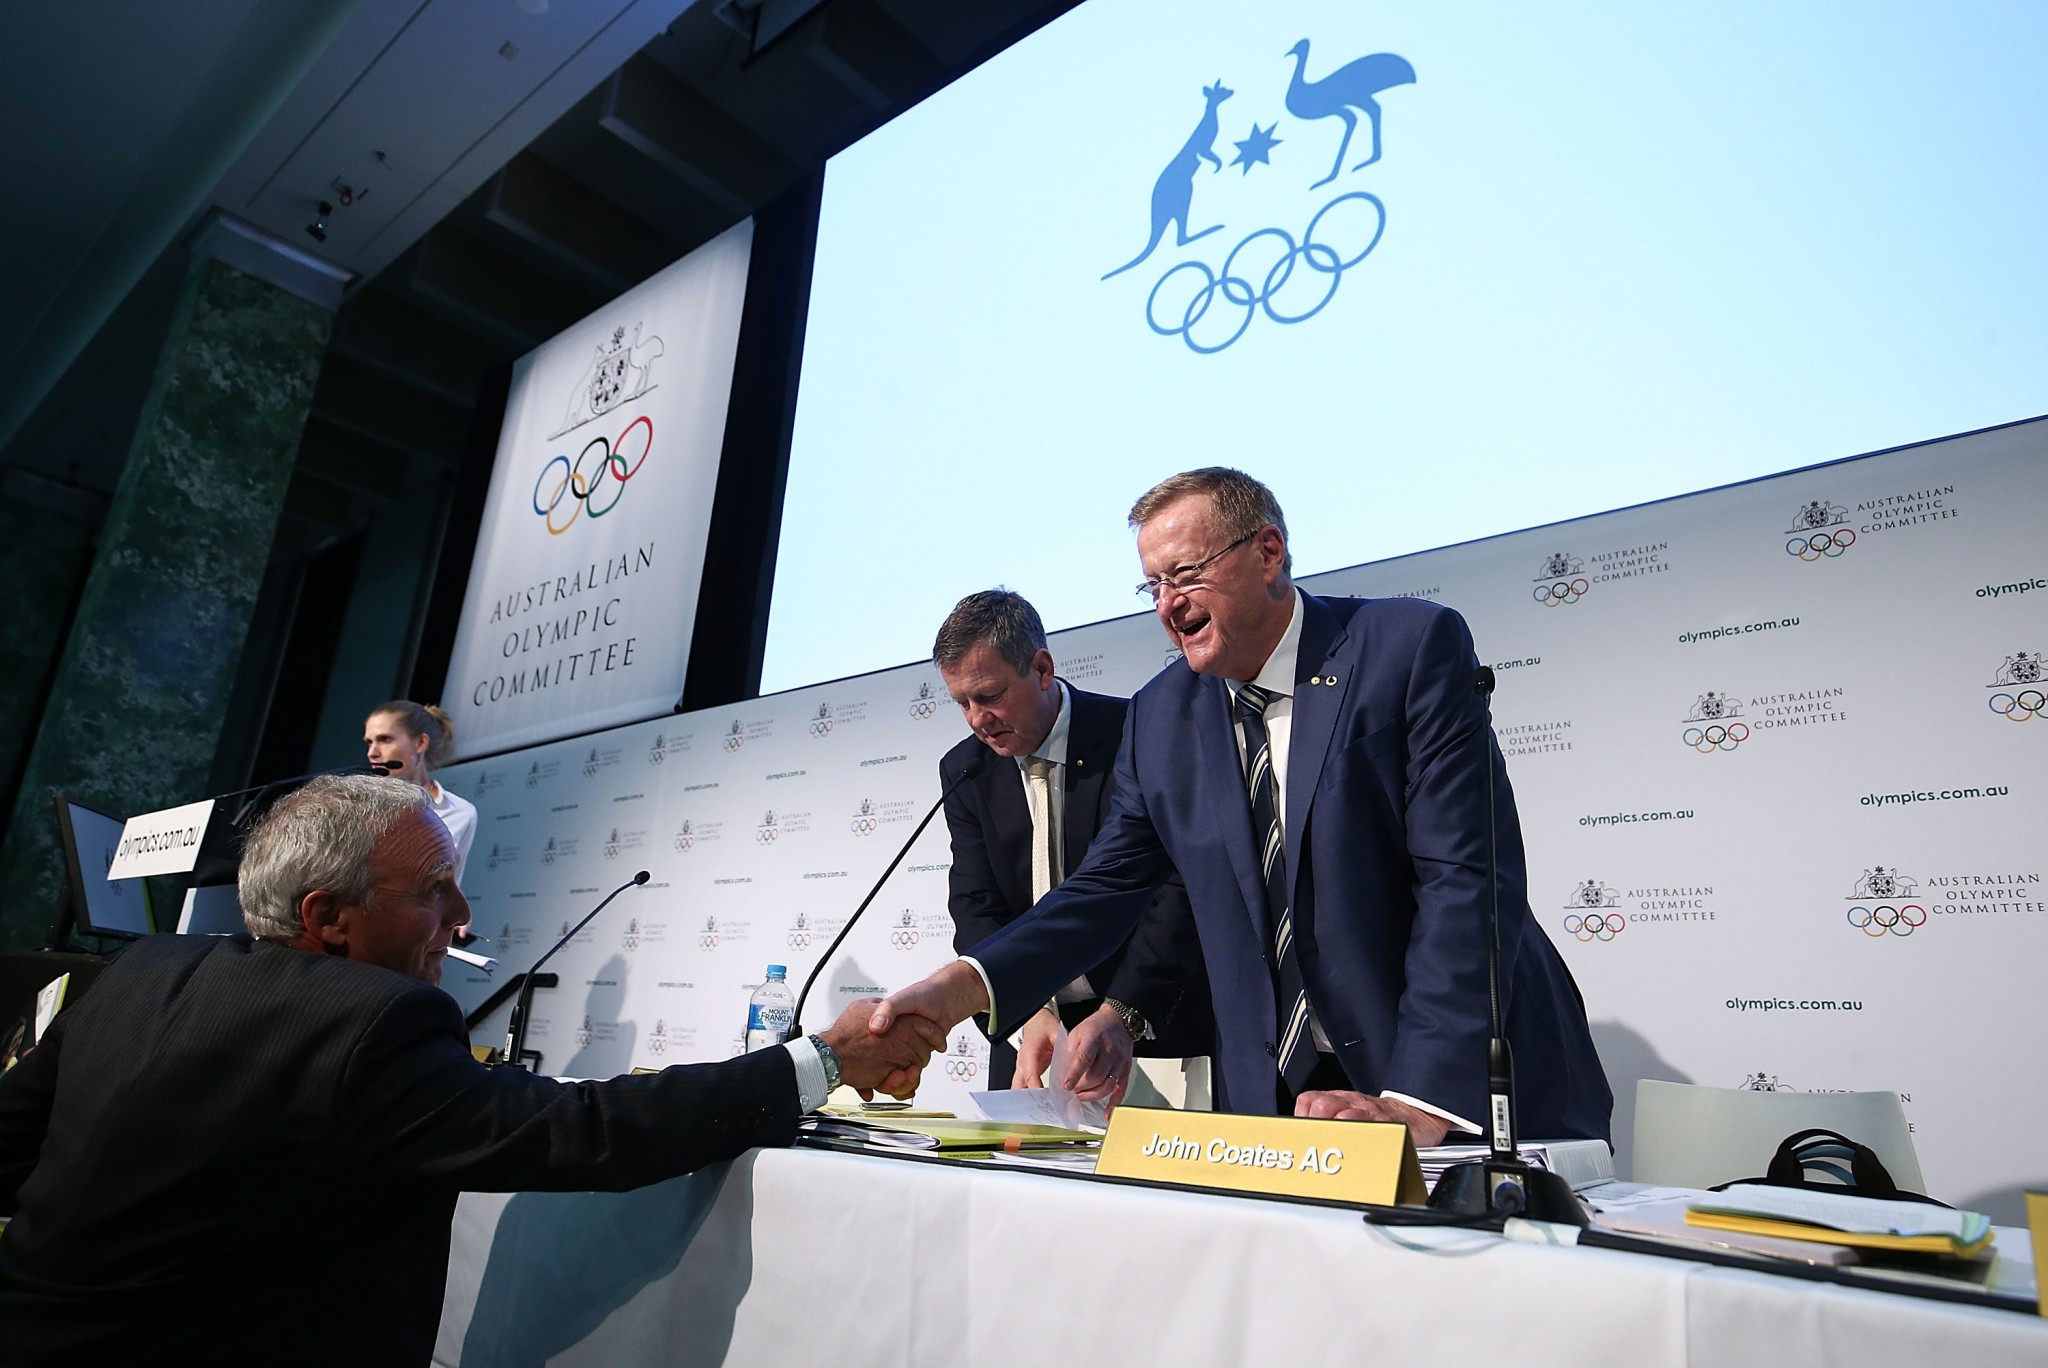 John Coates was re-elected as AOC President earlier this year, extending his 27-year reign ©Getty Images